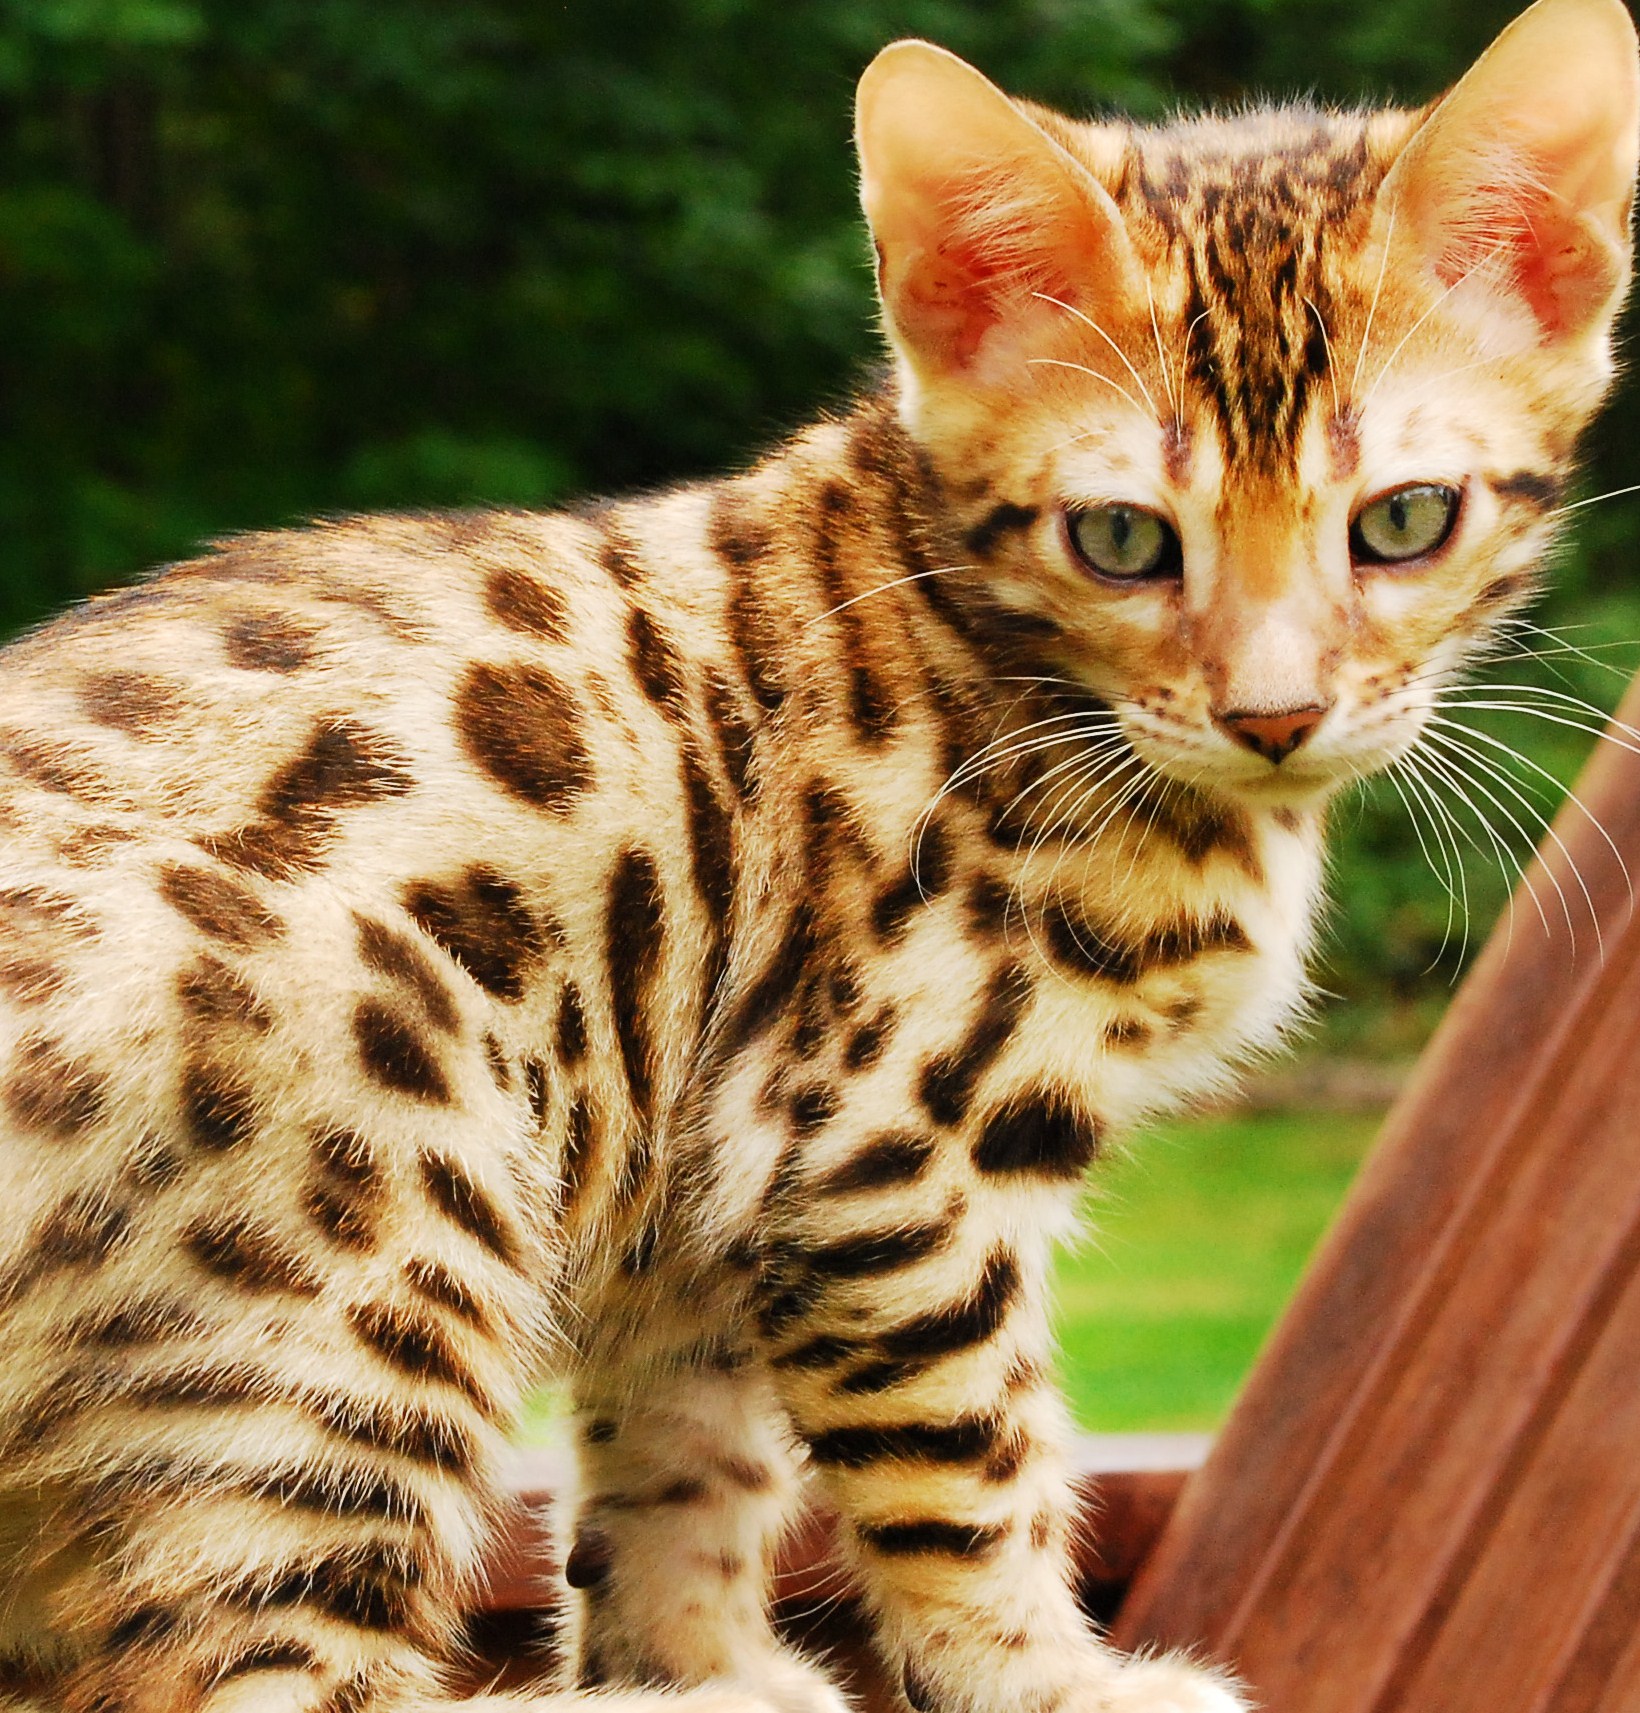 Cute Kittens Image Bengal HD Wallpaper And Background